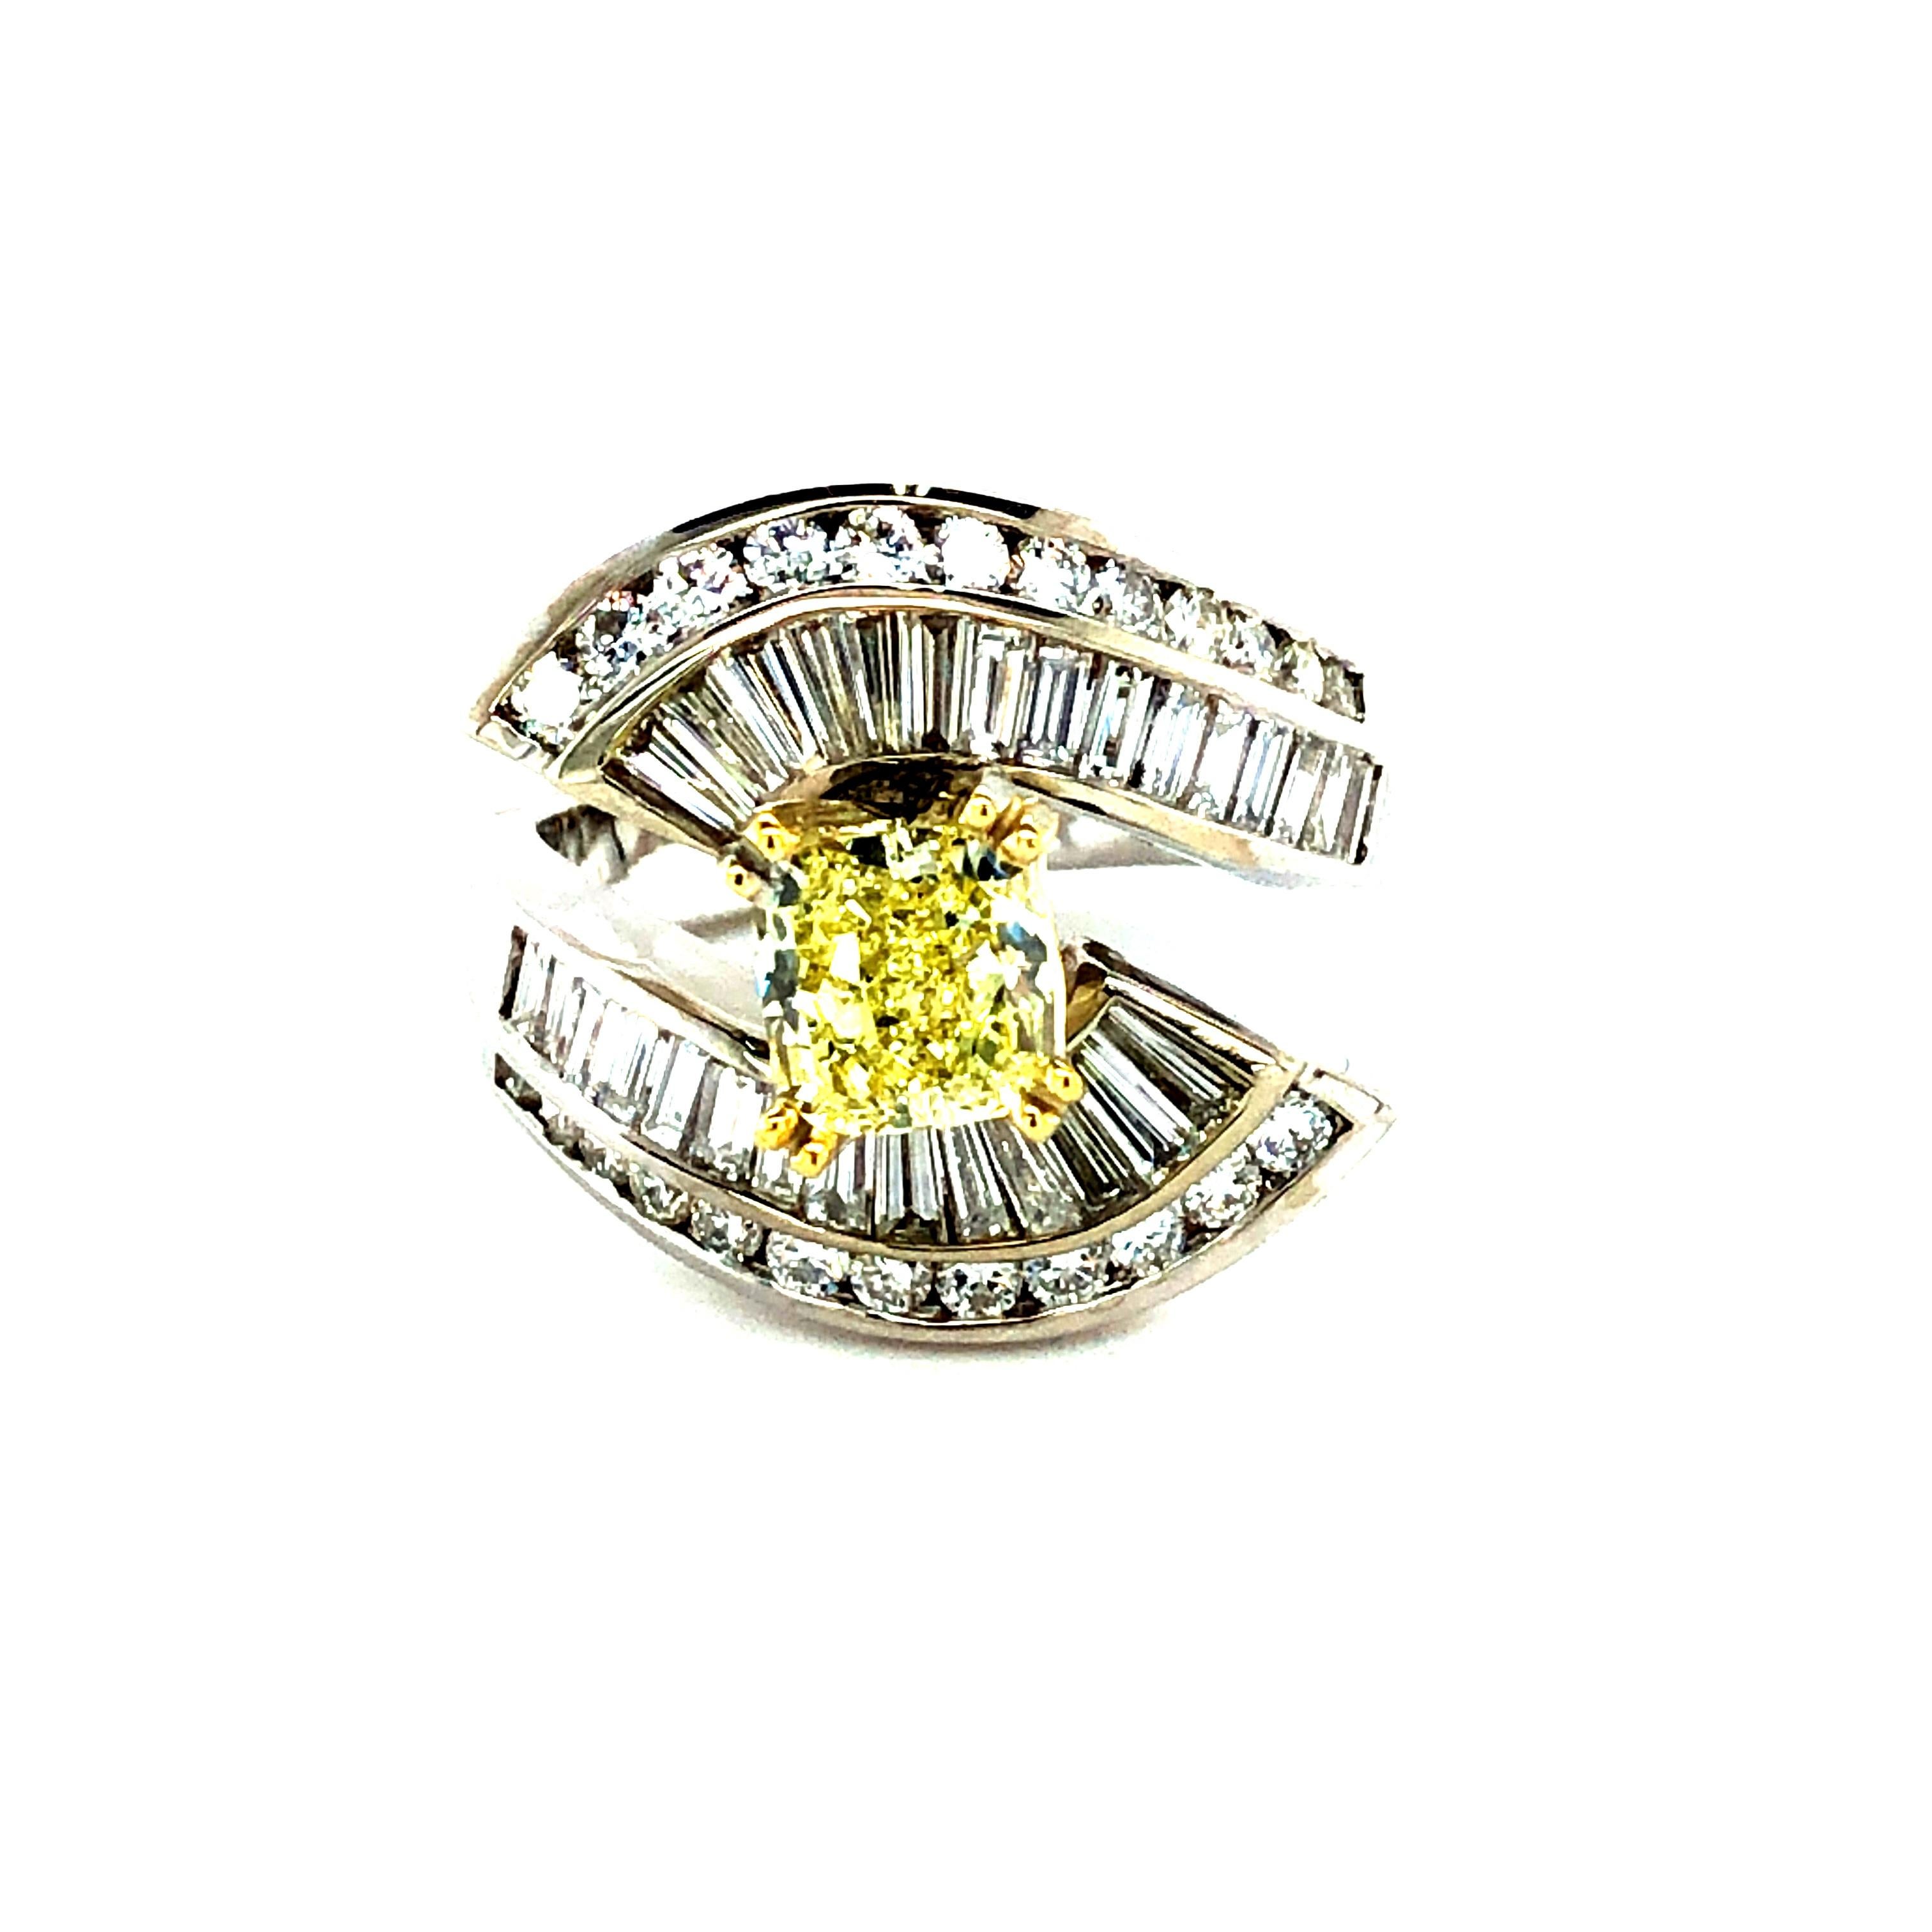 Offered here is an elegant engagement ring circa 1980, made i solid 18kt white gold shank and yellow gold 4 prong setting.
Featuring one natural earth mined G.I.A certified fancy yellow diamond weighing 1.25 ct set in a cascade of white natural